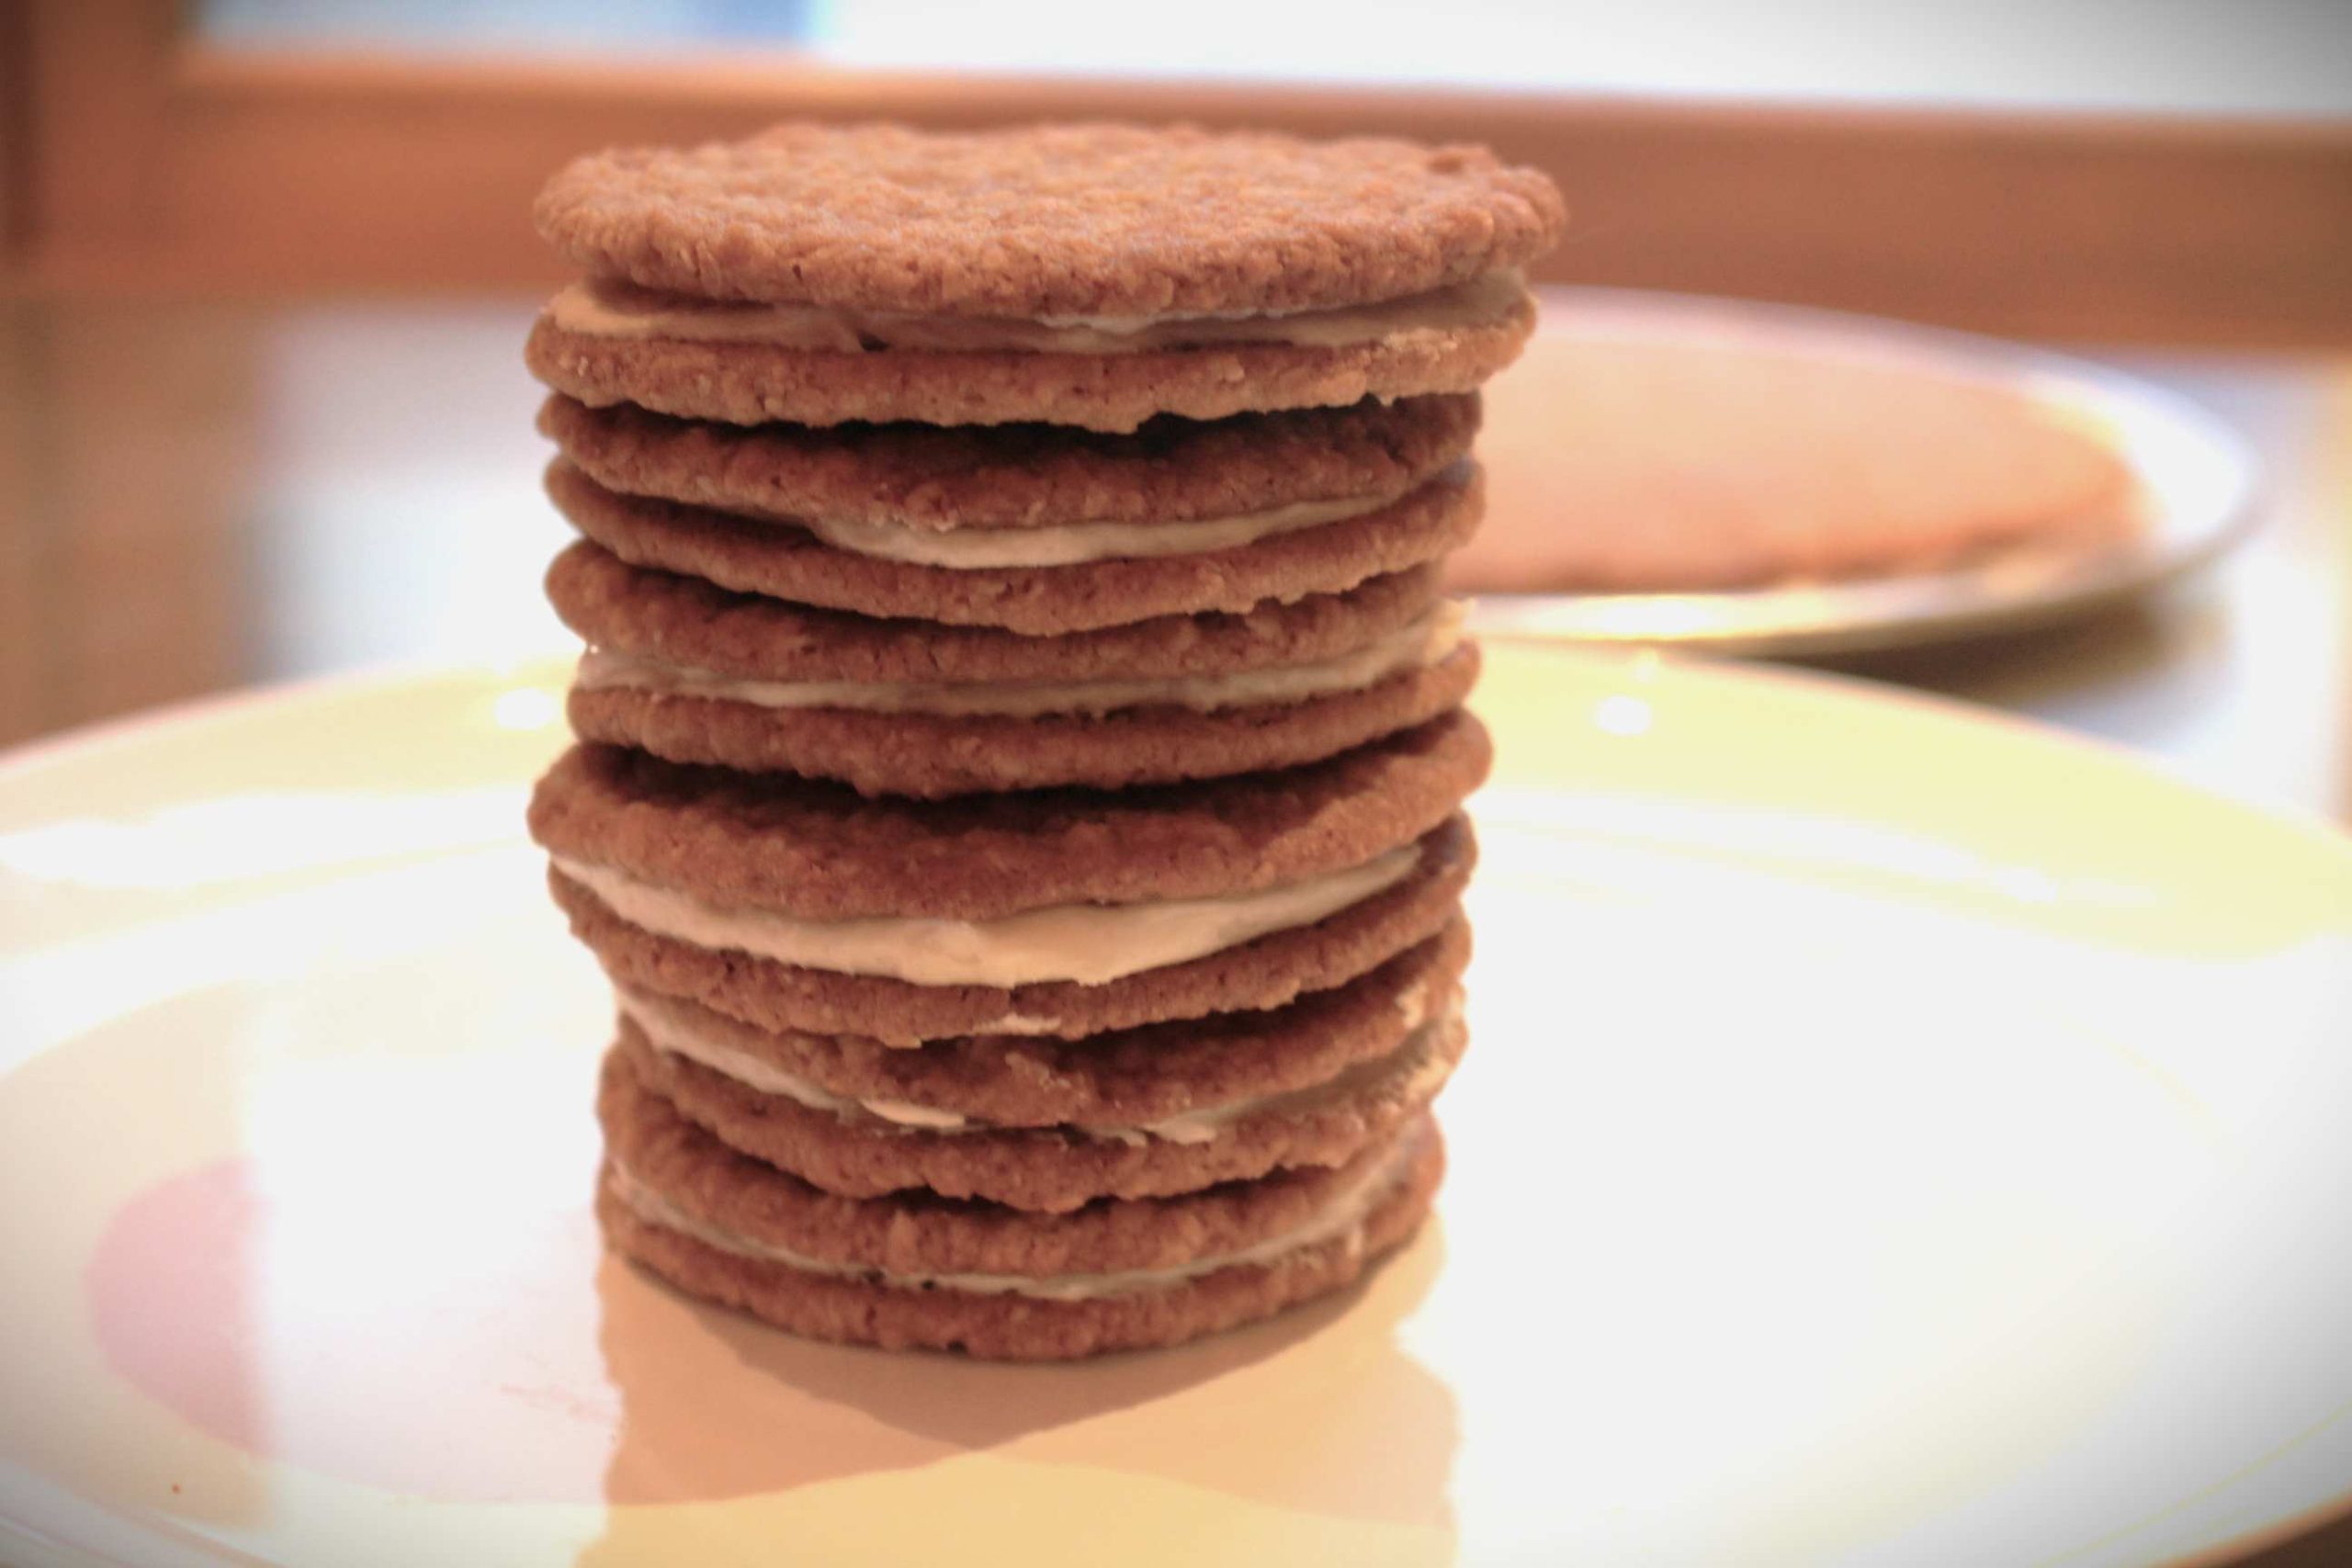 Plated stack of Oatmeal Buttercream Sandwich Cookies